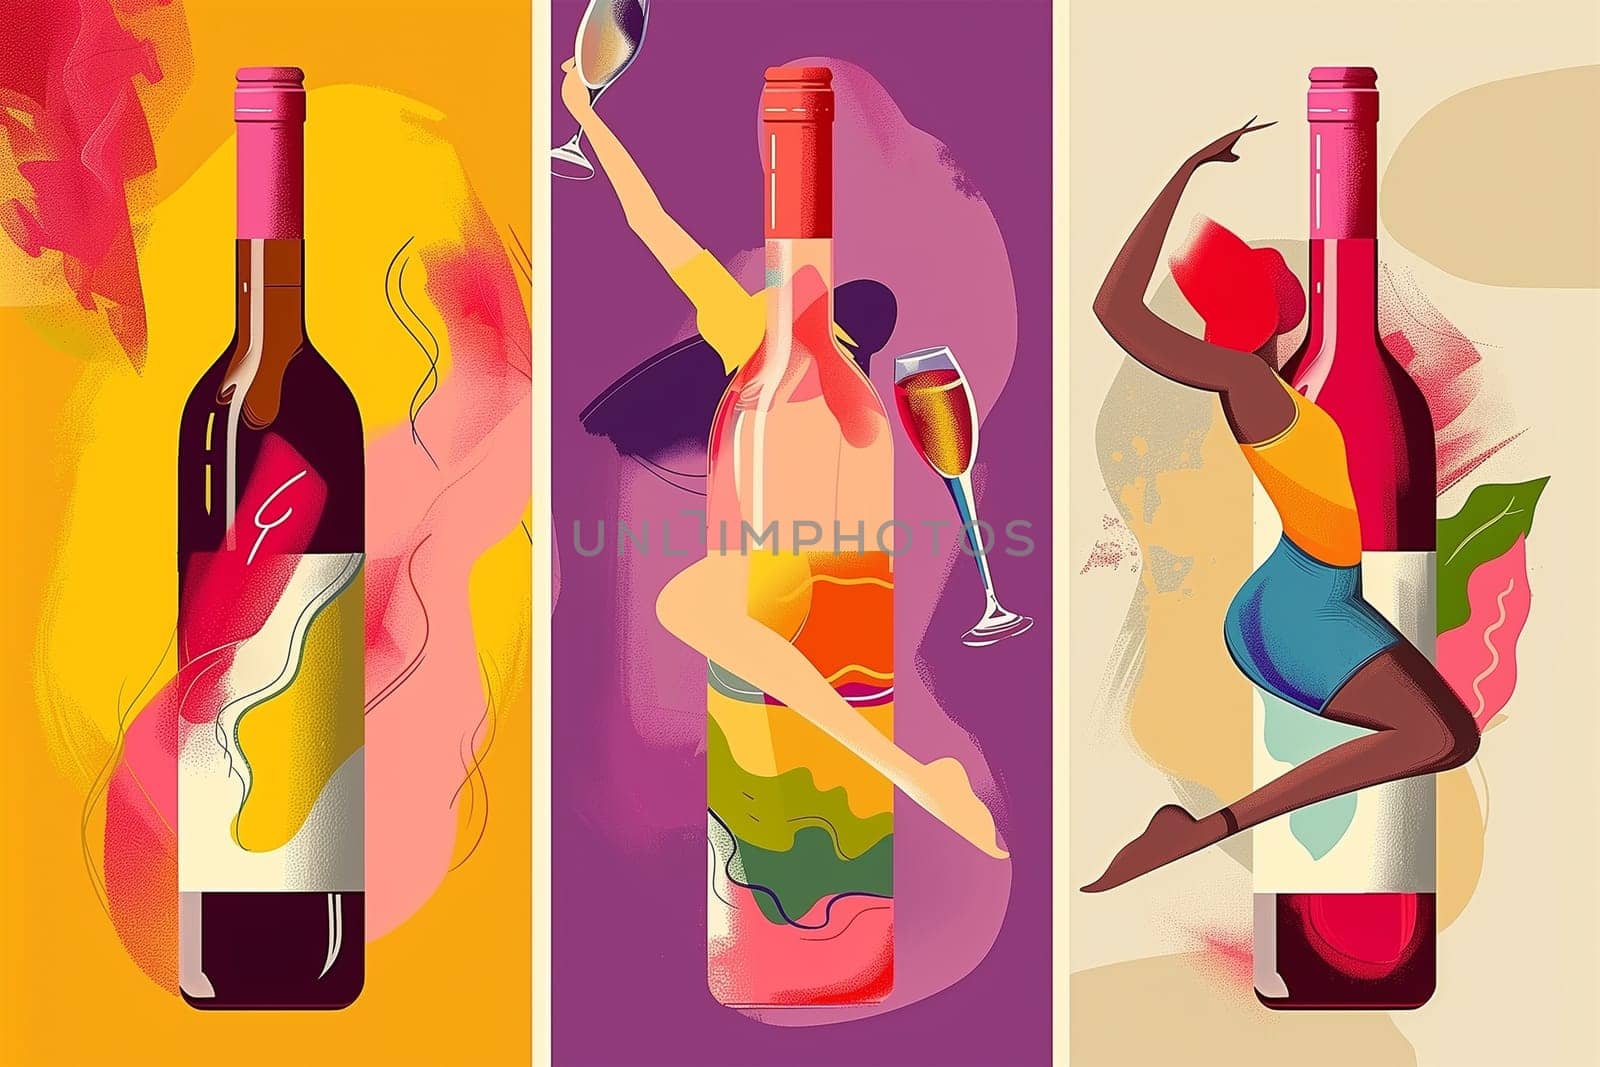 A vibrant set of illustrations featuring various wine bottles in different colors and shapes, alongside a lively woman dancing.